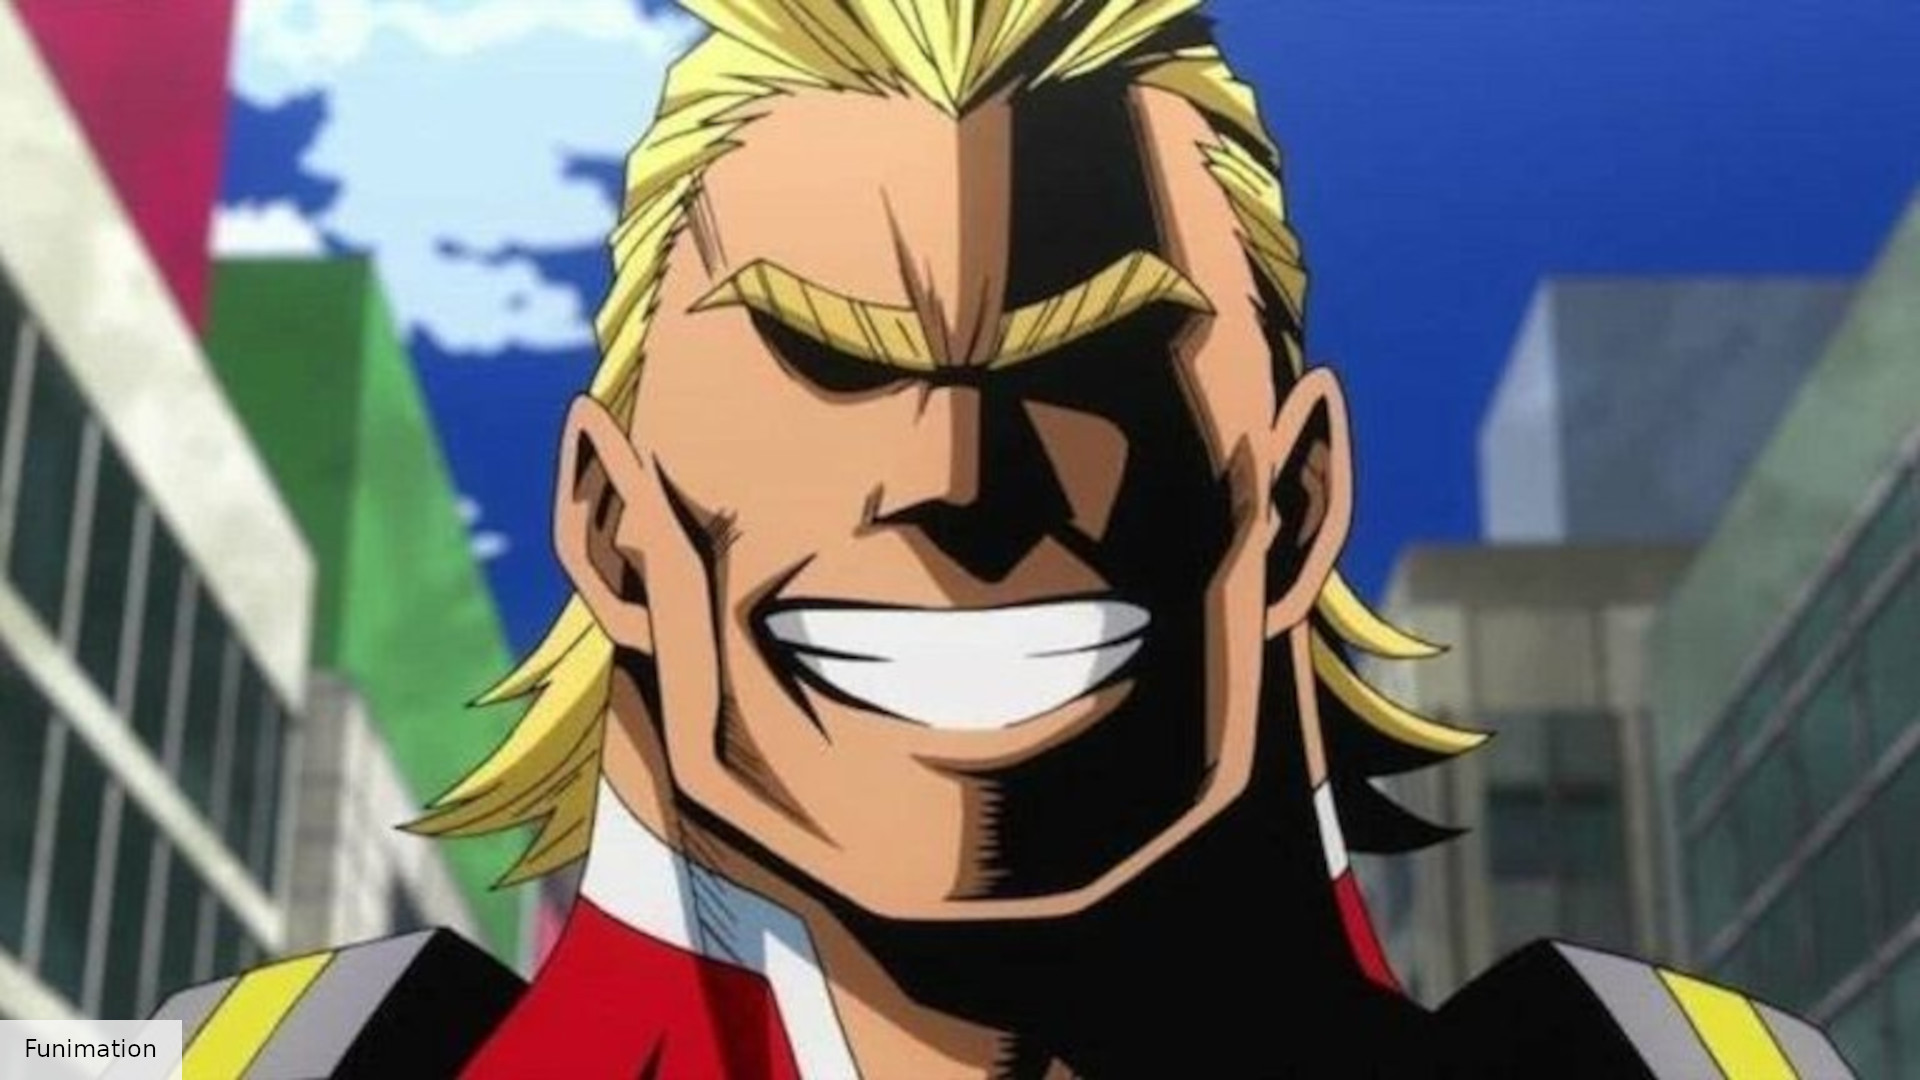 22 My Hero Academia Main Characters Ranked From Worst to Best by Character  Arc  Wealth of Geeks